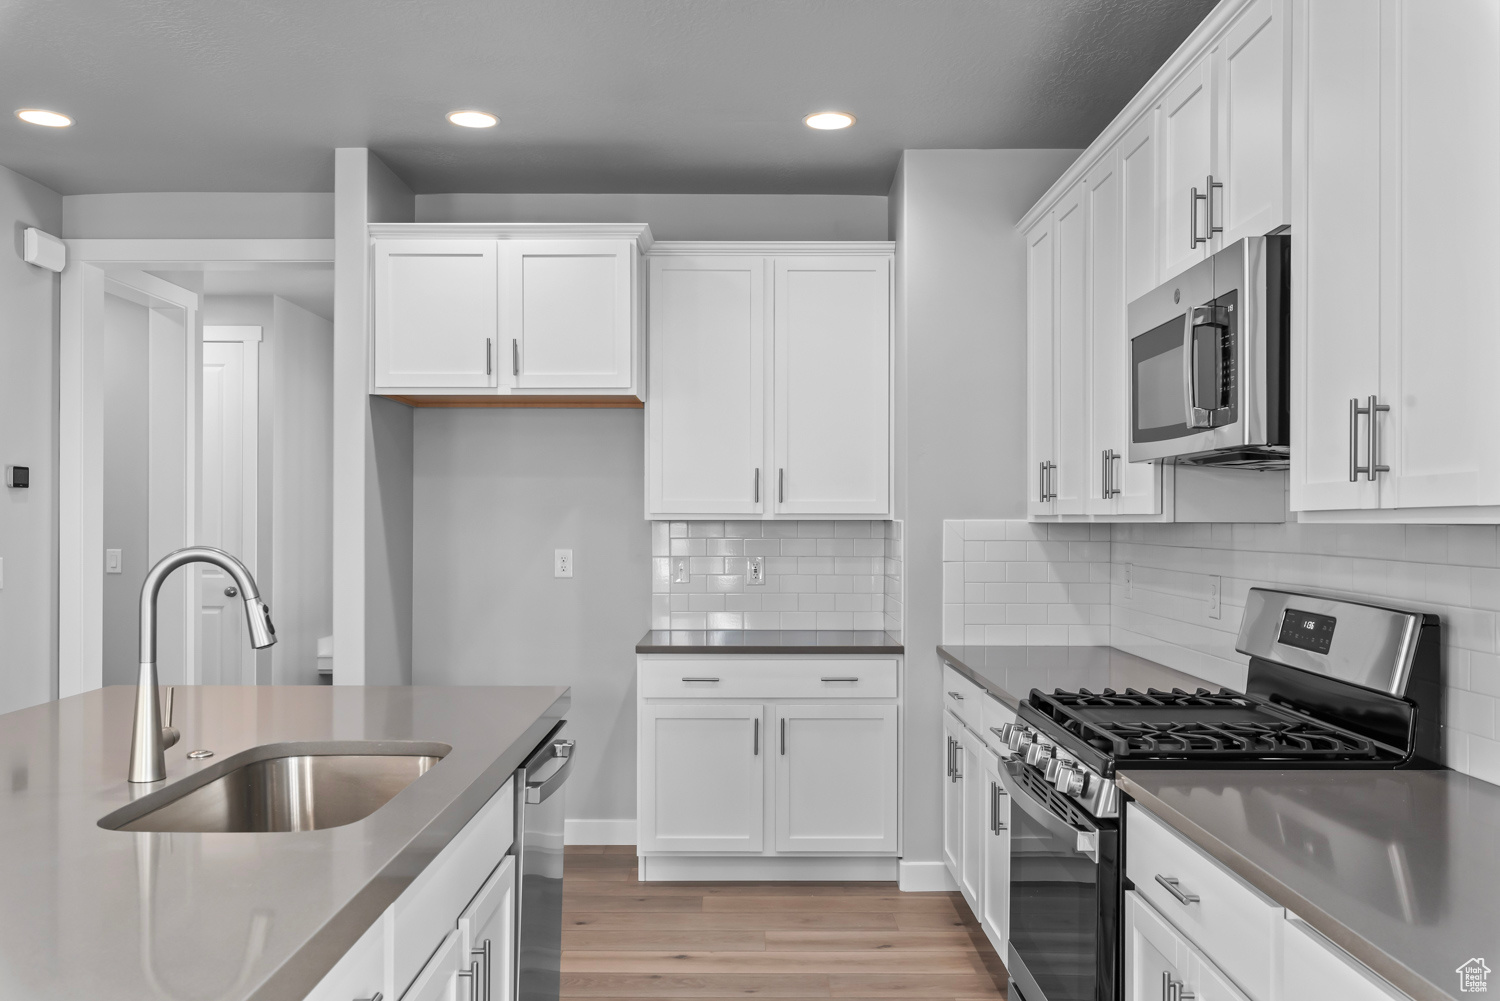 Kitchen featuring white cabinets, stainless steel appliances, backsplash, light wood-type flooring, and sink